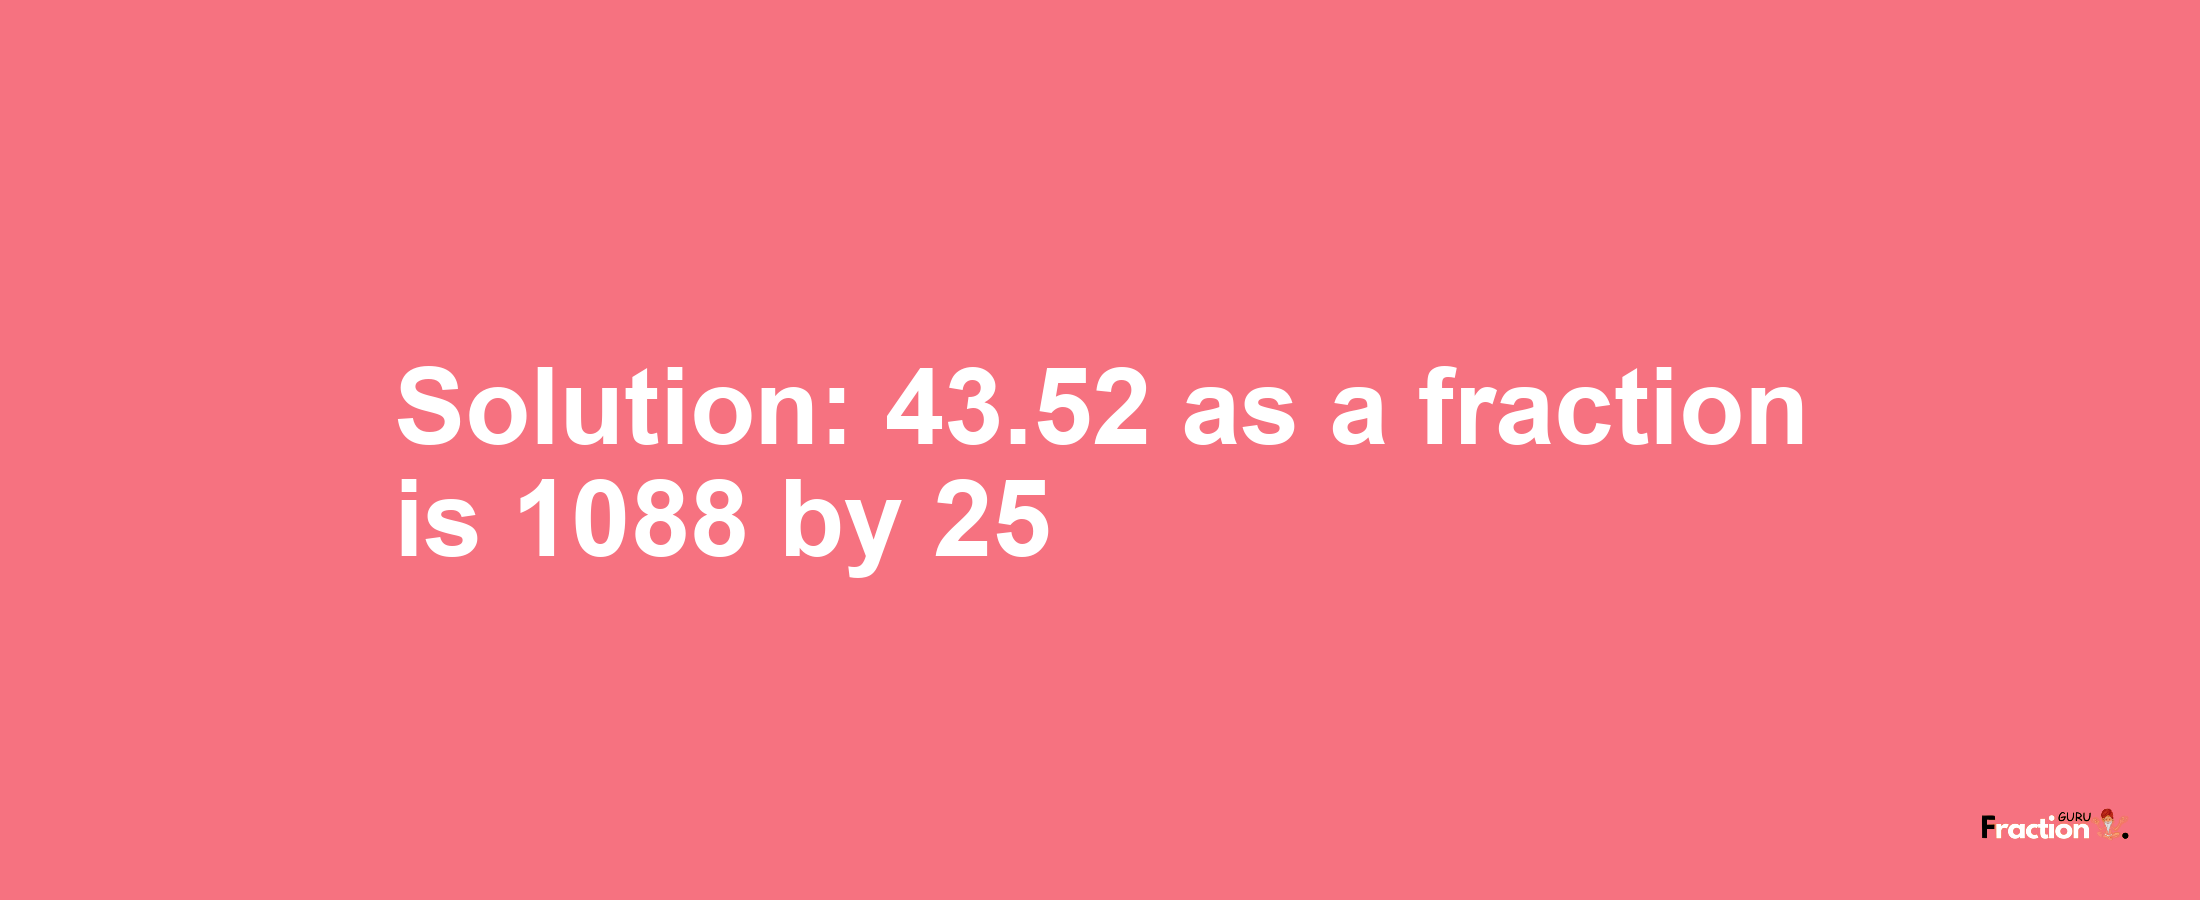 Solution:43.52 as a fraction is 1088/25